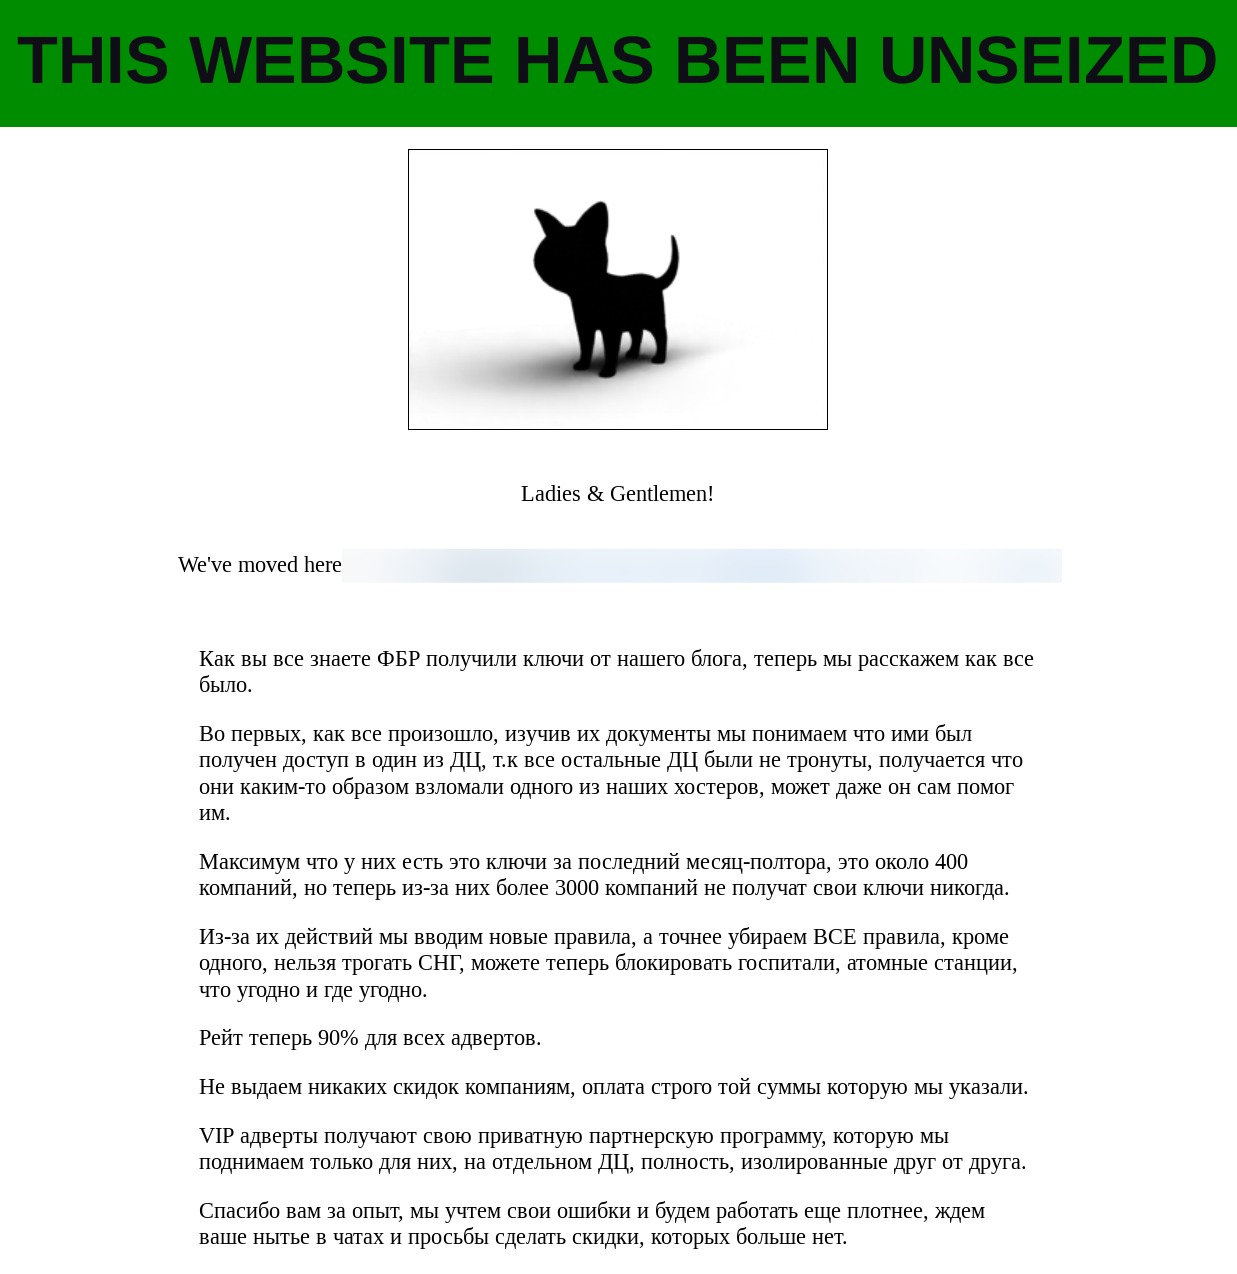 Screenshot of webpage that has a white background. There is a green banner at the top with black text that says "THIS WEBSITE HAS BEEN UNSEIZED." There is a graphic of a black cat below it, along with a letter written in Russian. 